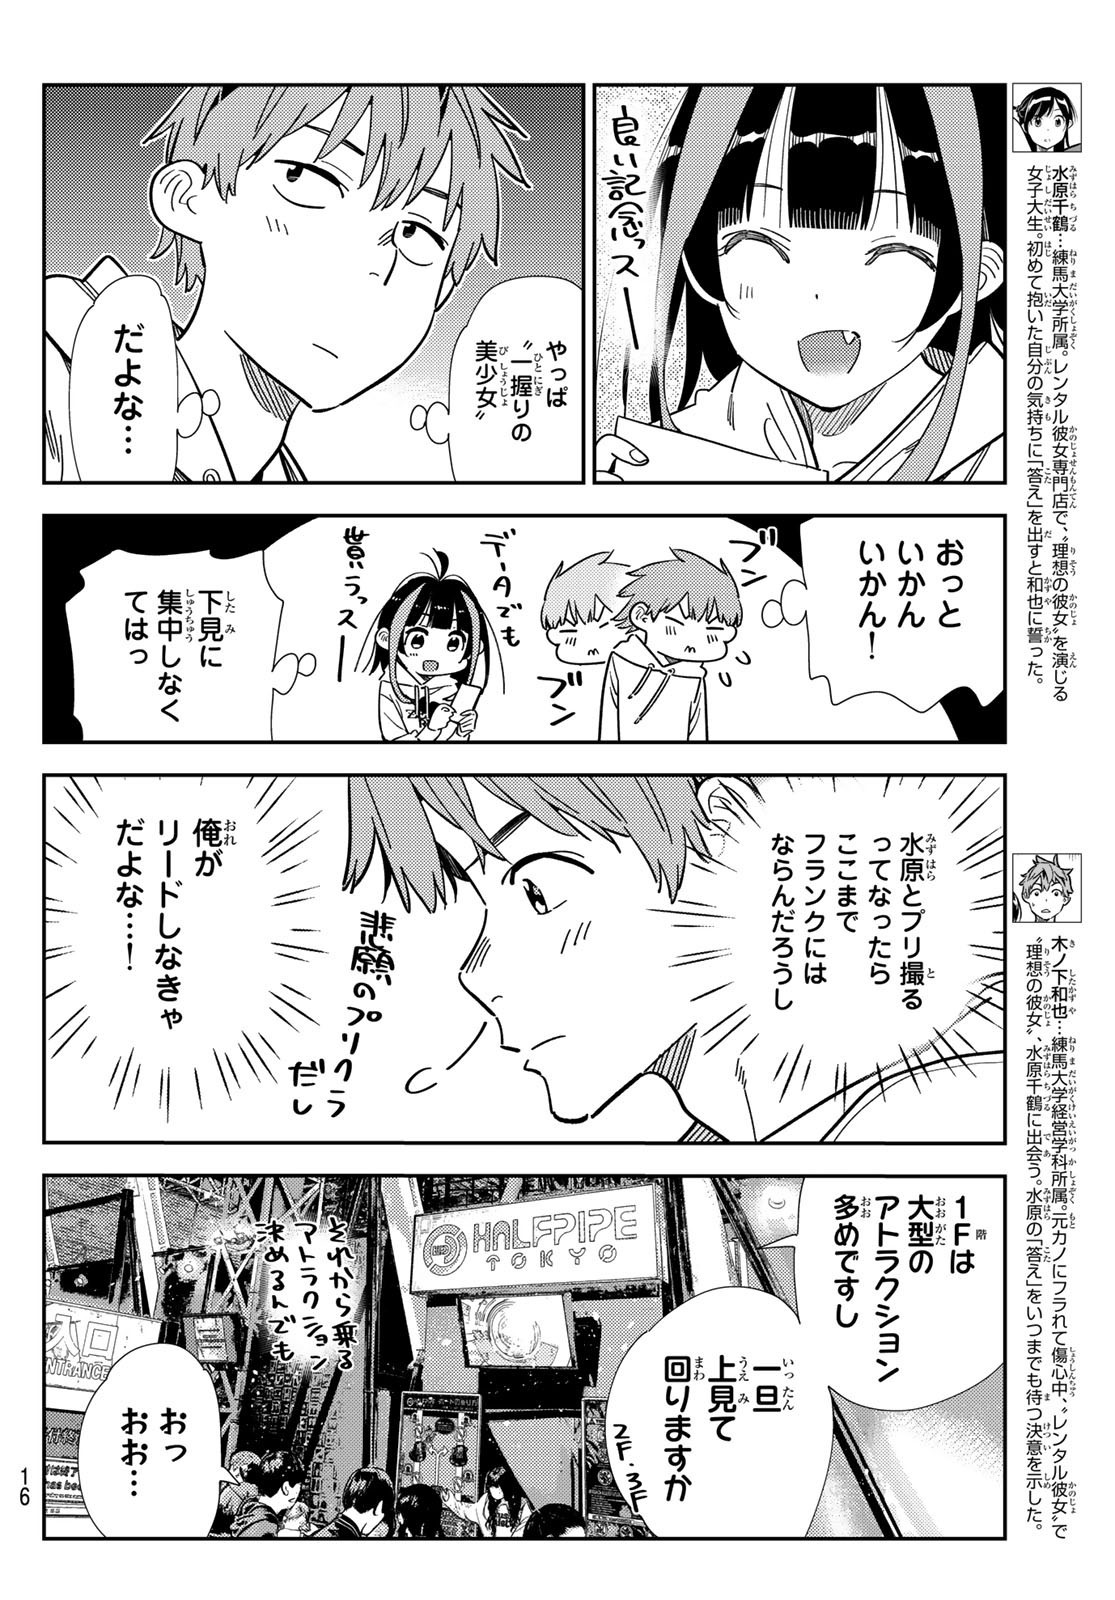 Weekly Shōnen Magazine - 週刊少年マガジン - Chapter 2024-34 - Page 13